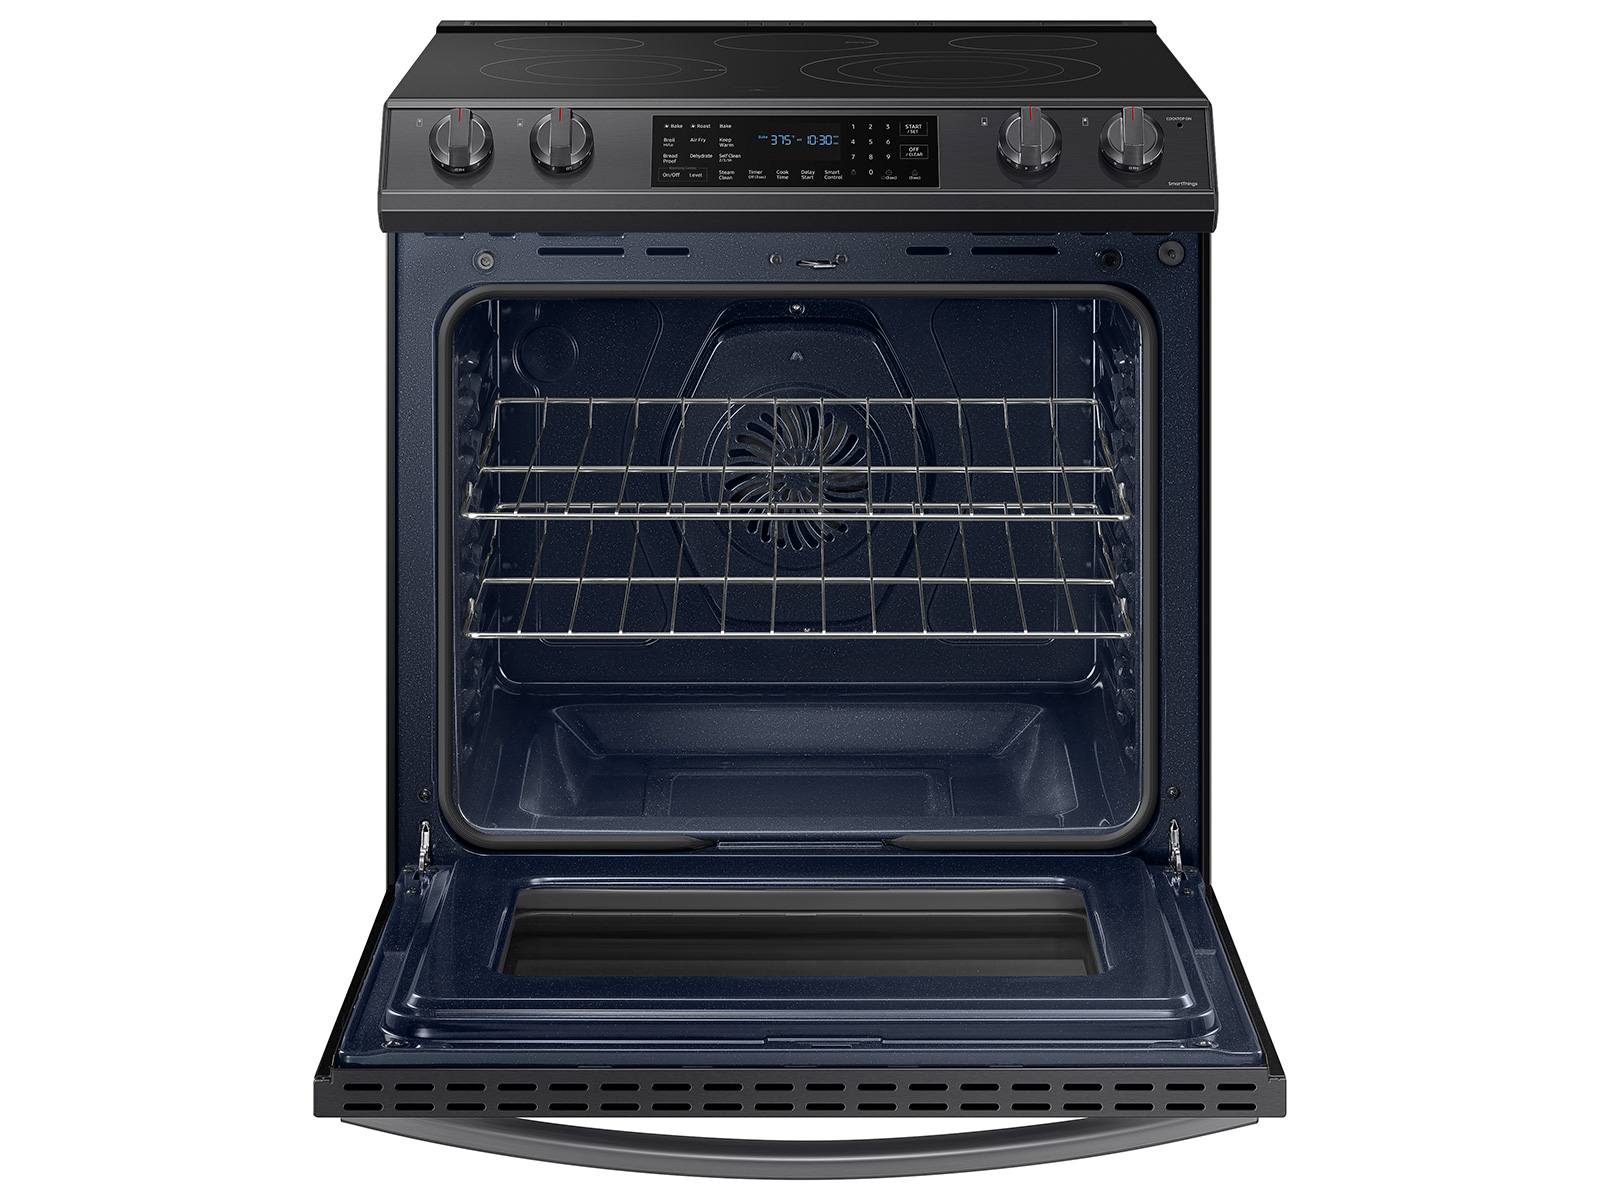 Samsung 6.3 Cu. ft. Slide-in Electric Range with Air Fry, Black Stainless Steel - NE63T8511SG